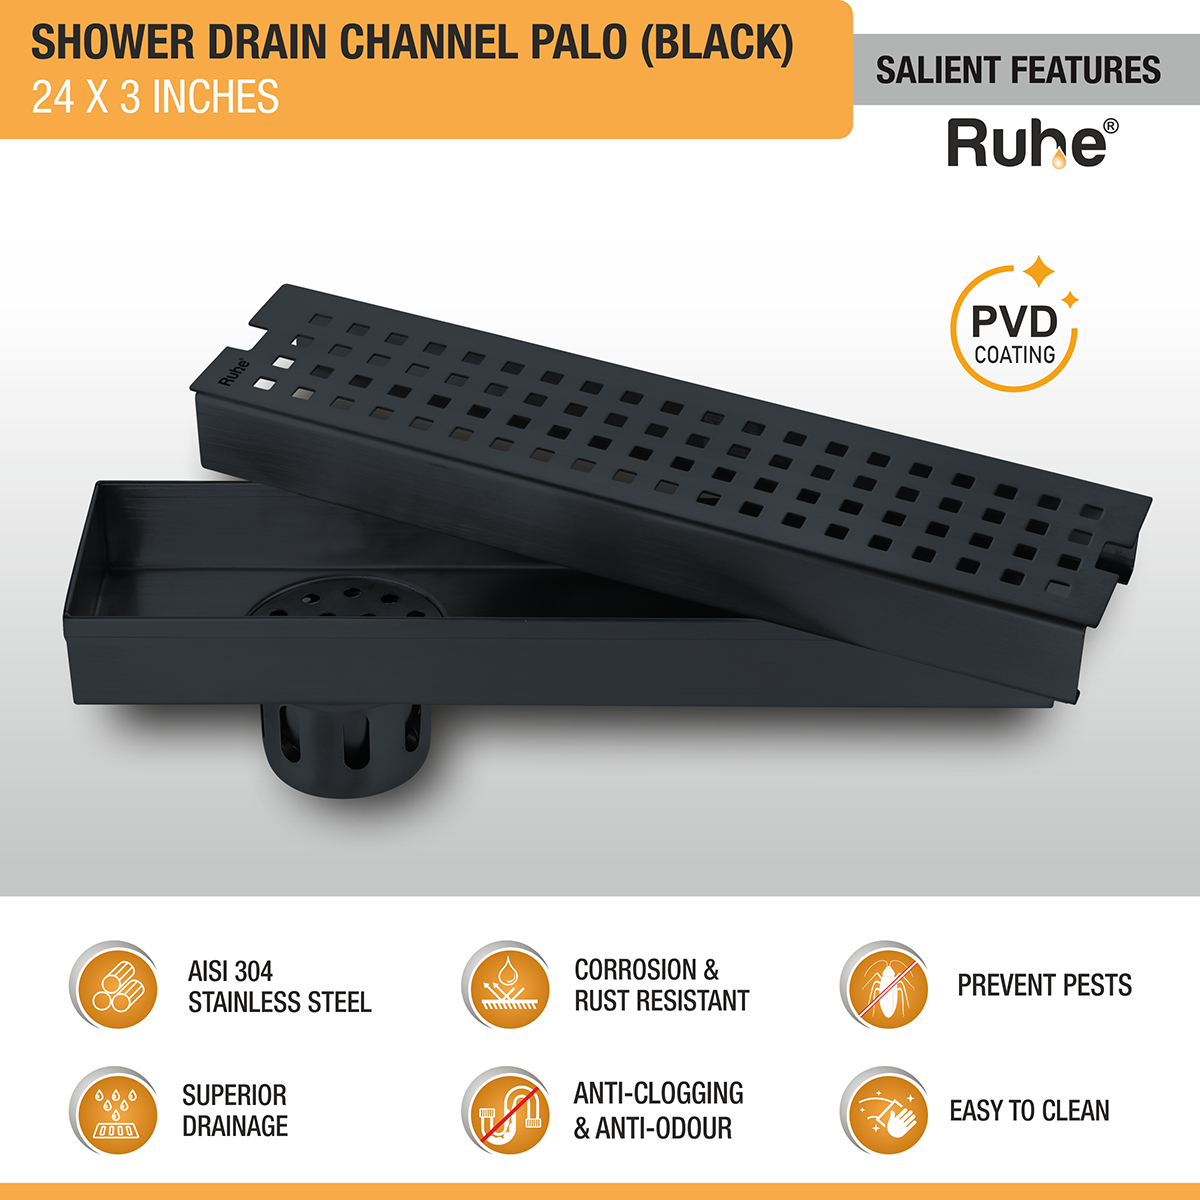 Palo Shower Drain Channel (24 x 3 Inches) Black PVD Coated features and benefits